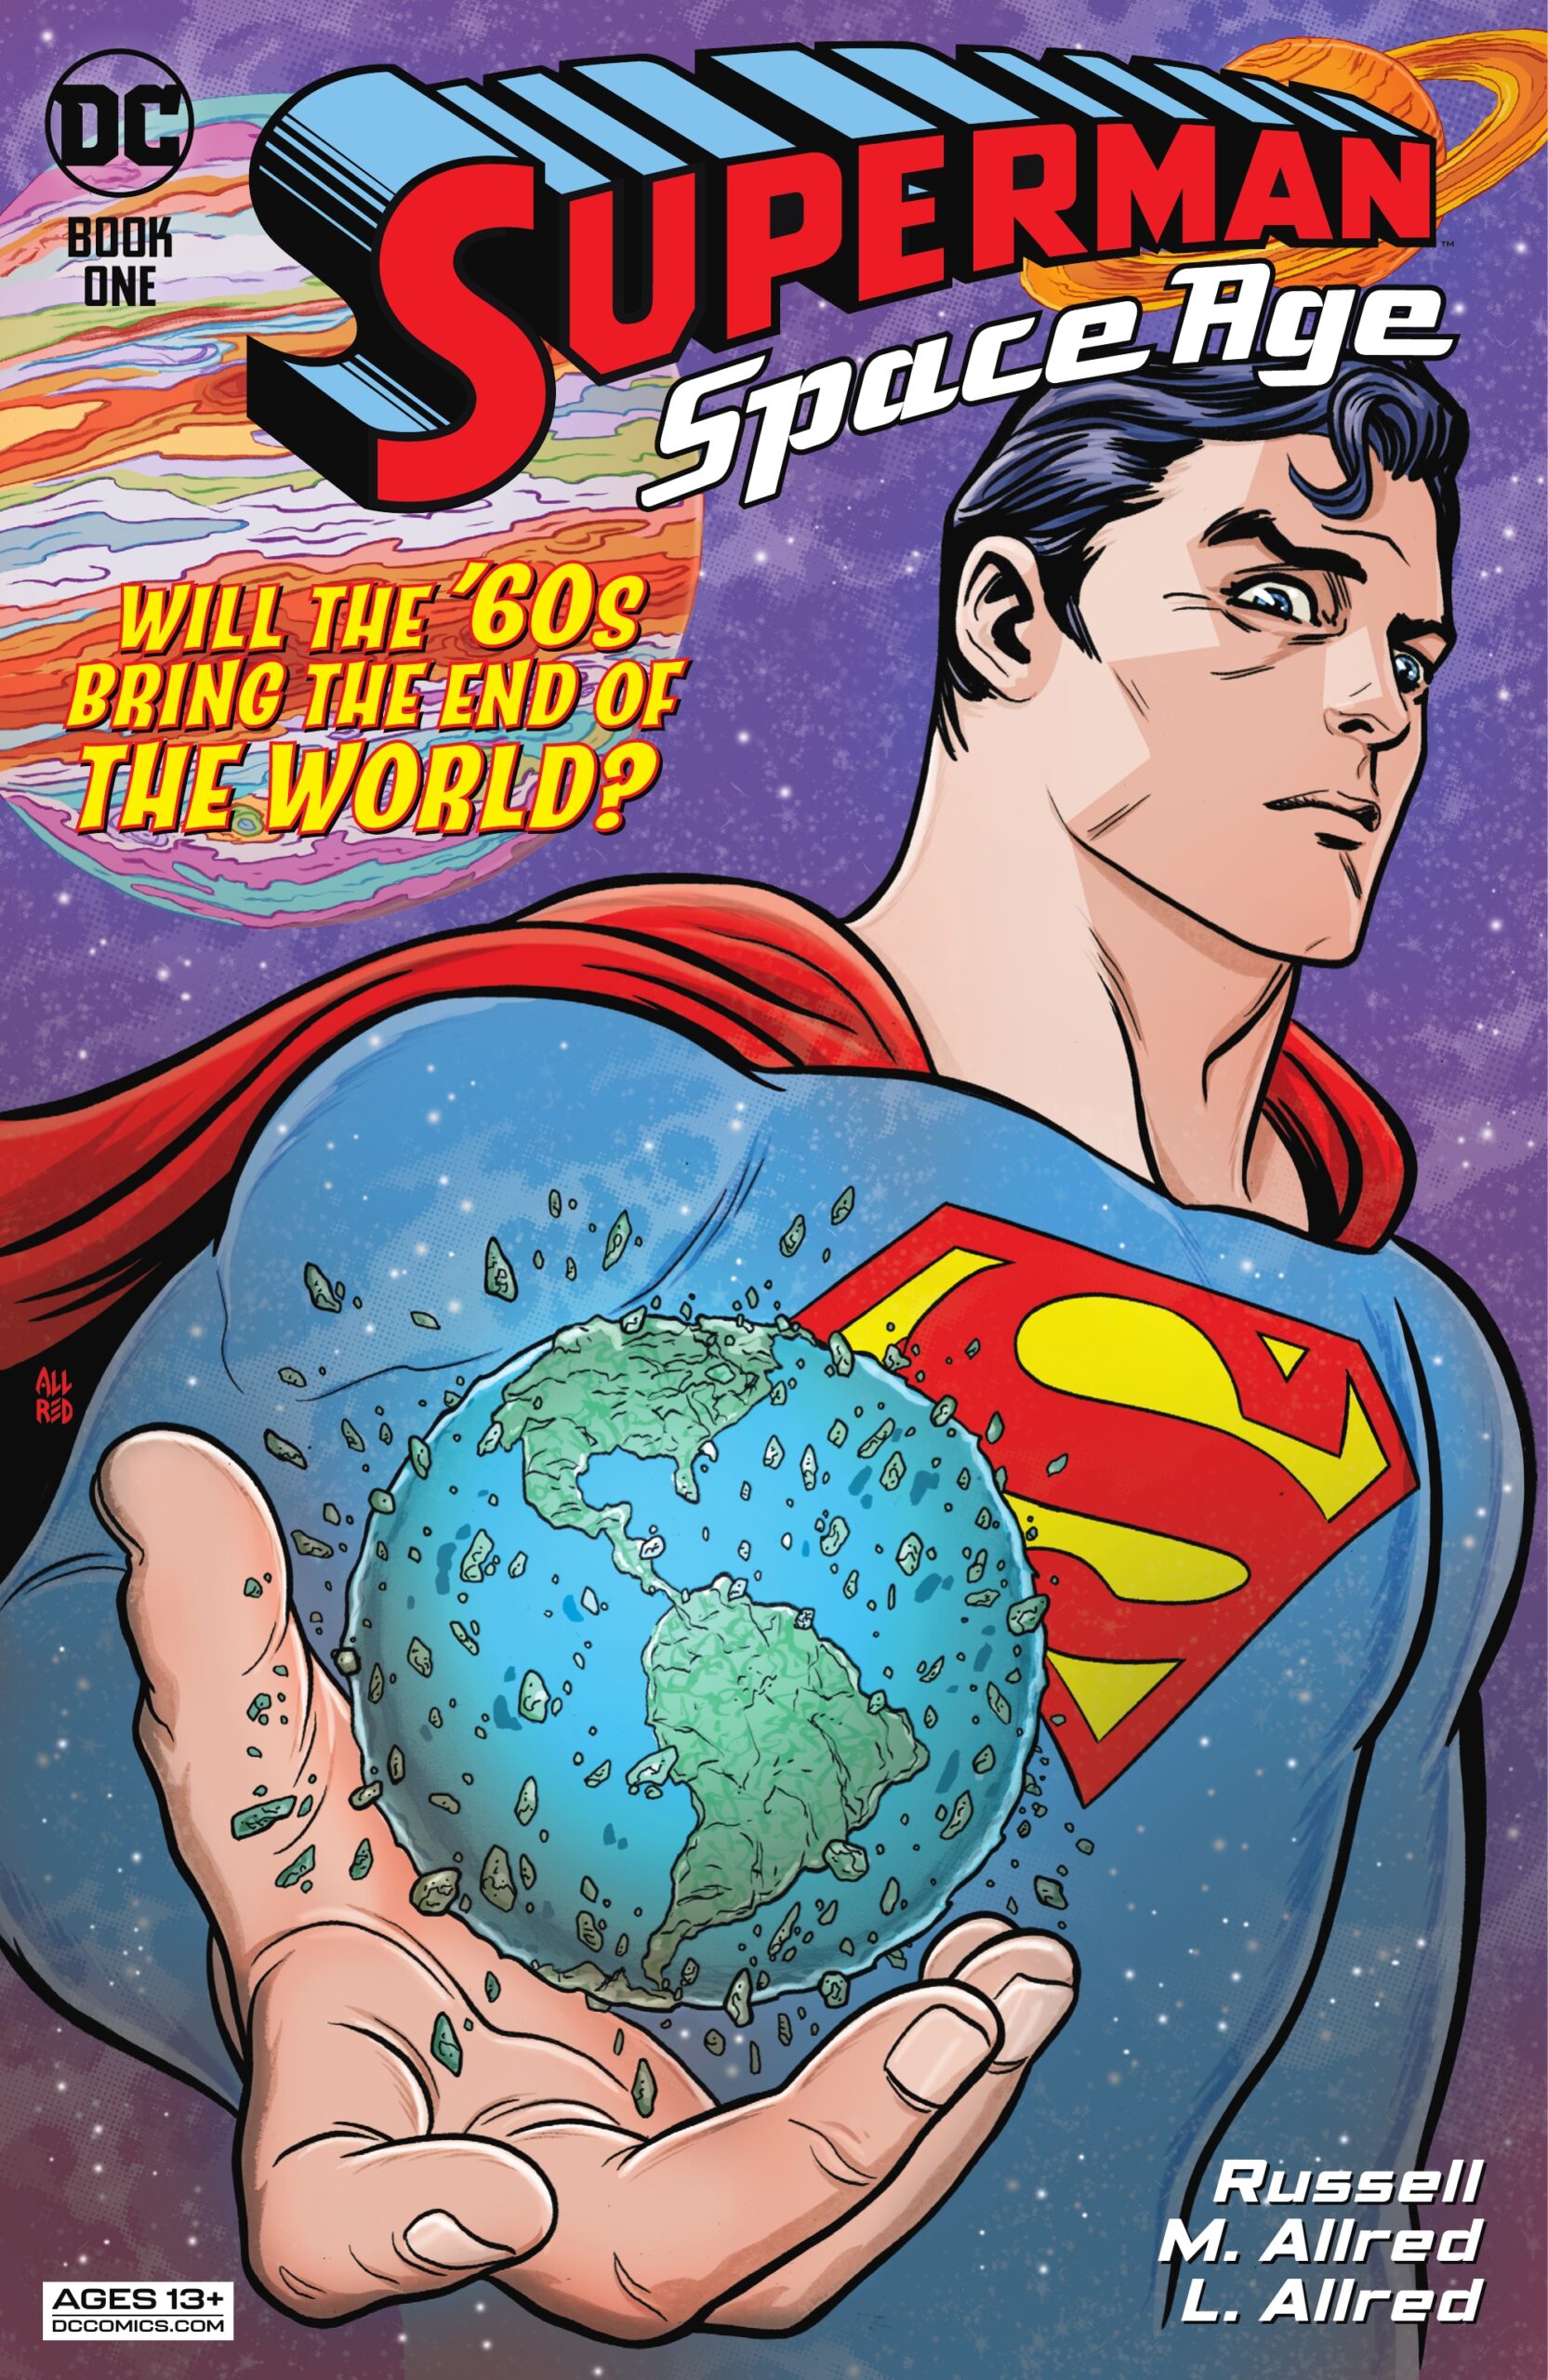 Superman: Space Age #1